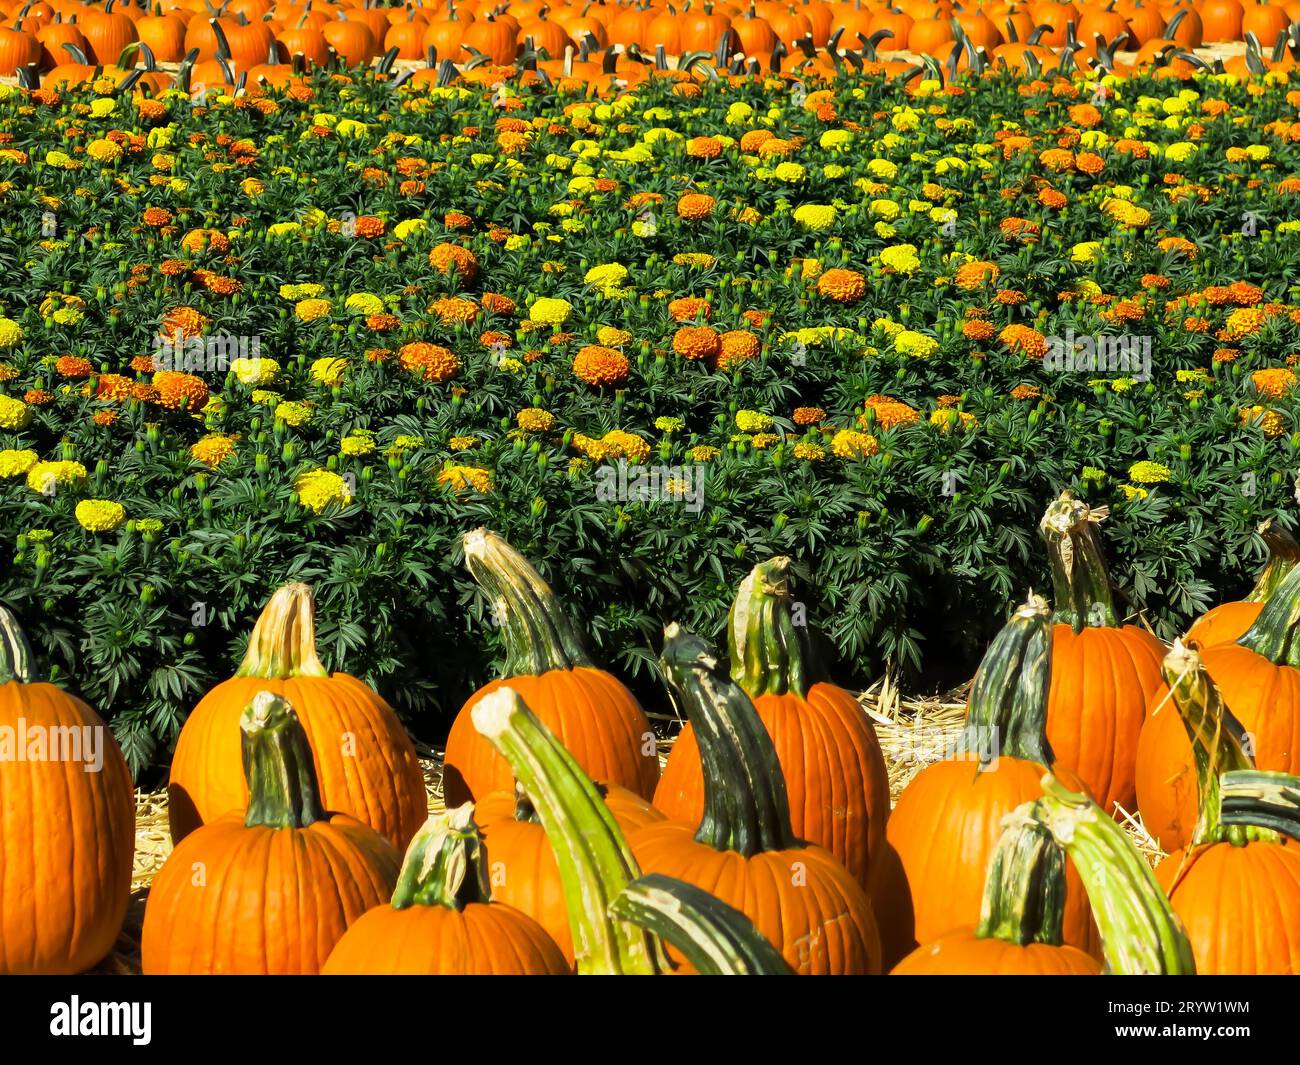 A field of Pumpkins and Flowers Stock Photo